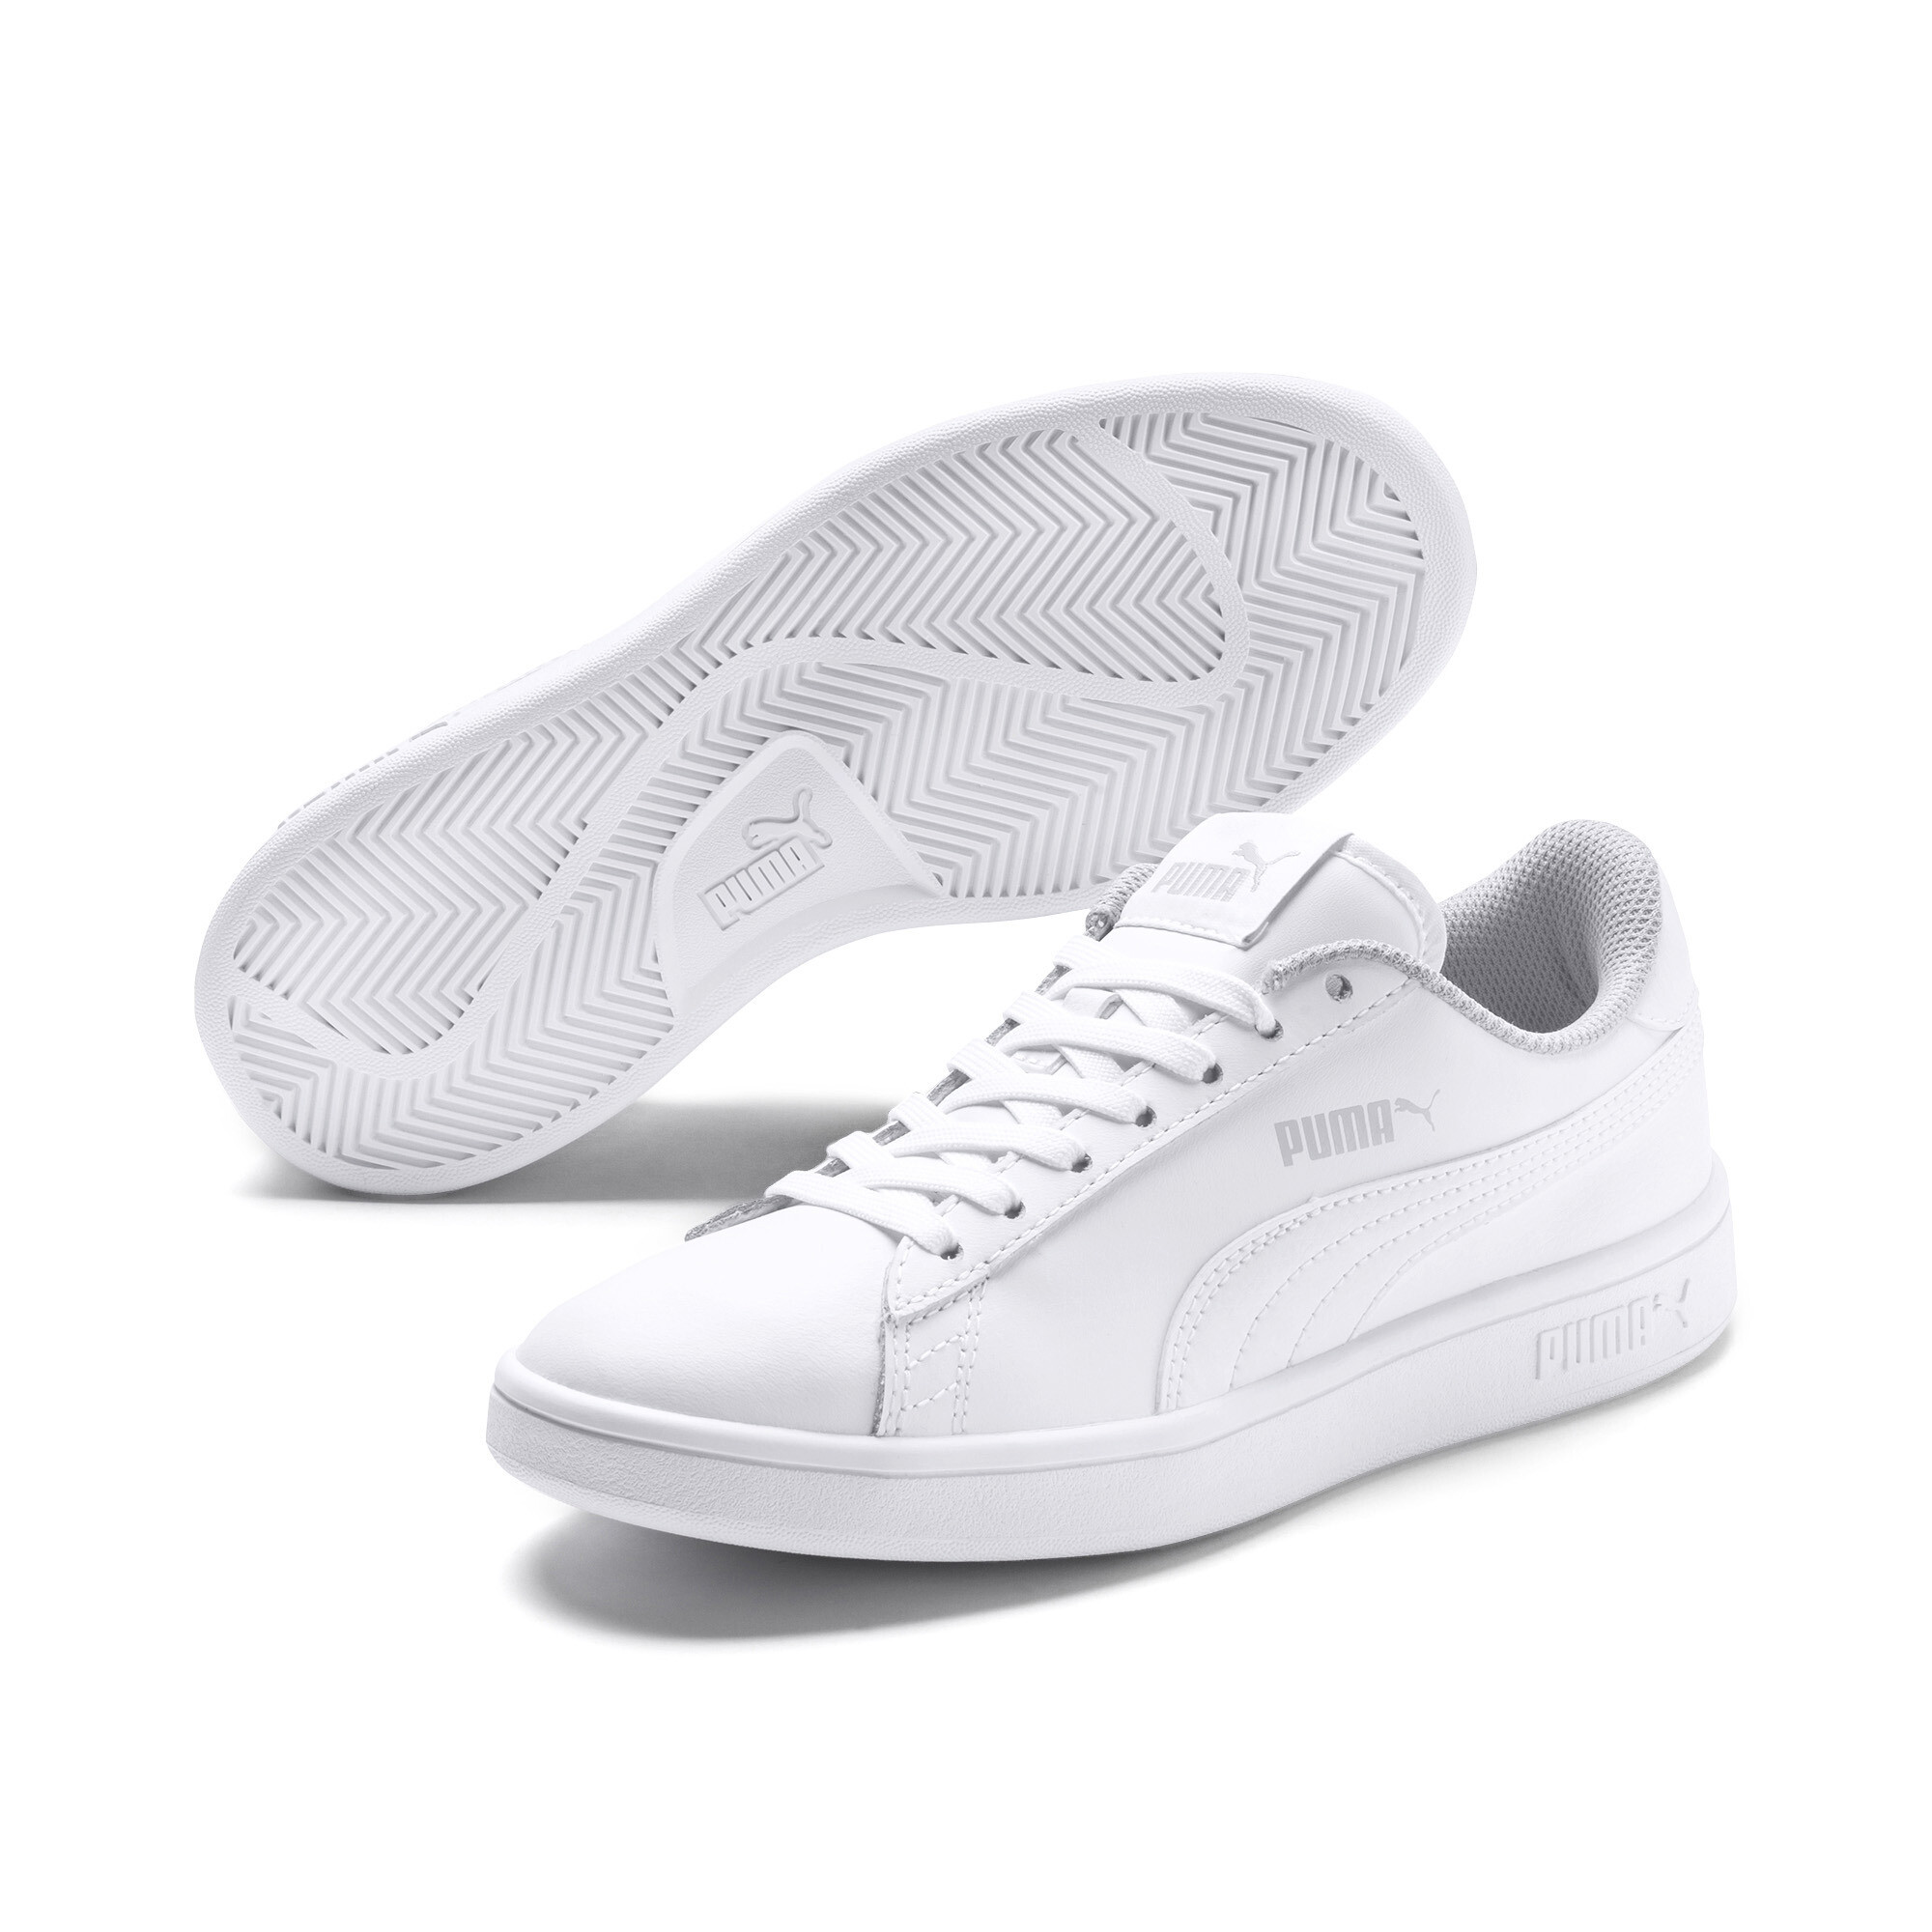 Puma Smash V2 Youth Trainers Shoes In White, Size EU 35.5